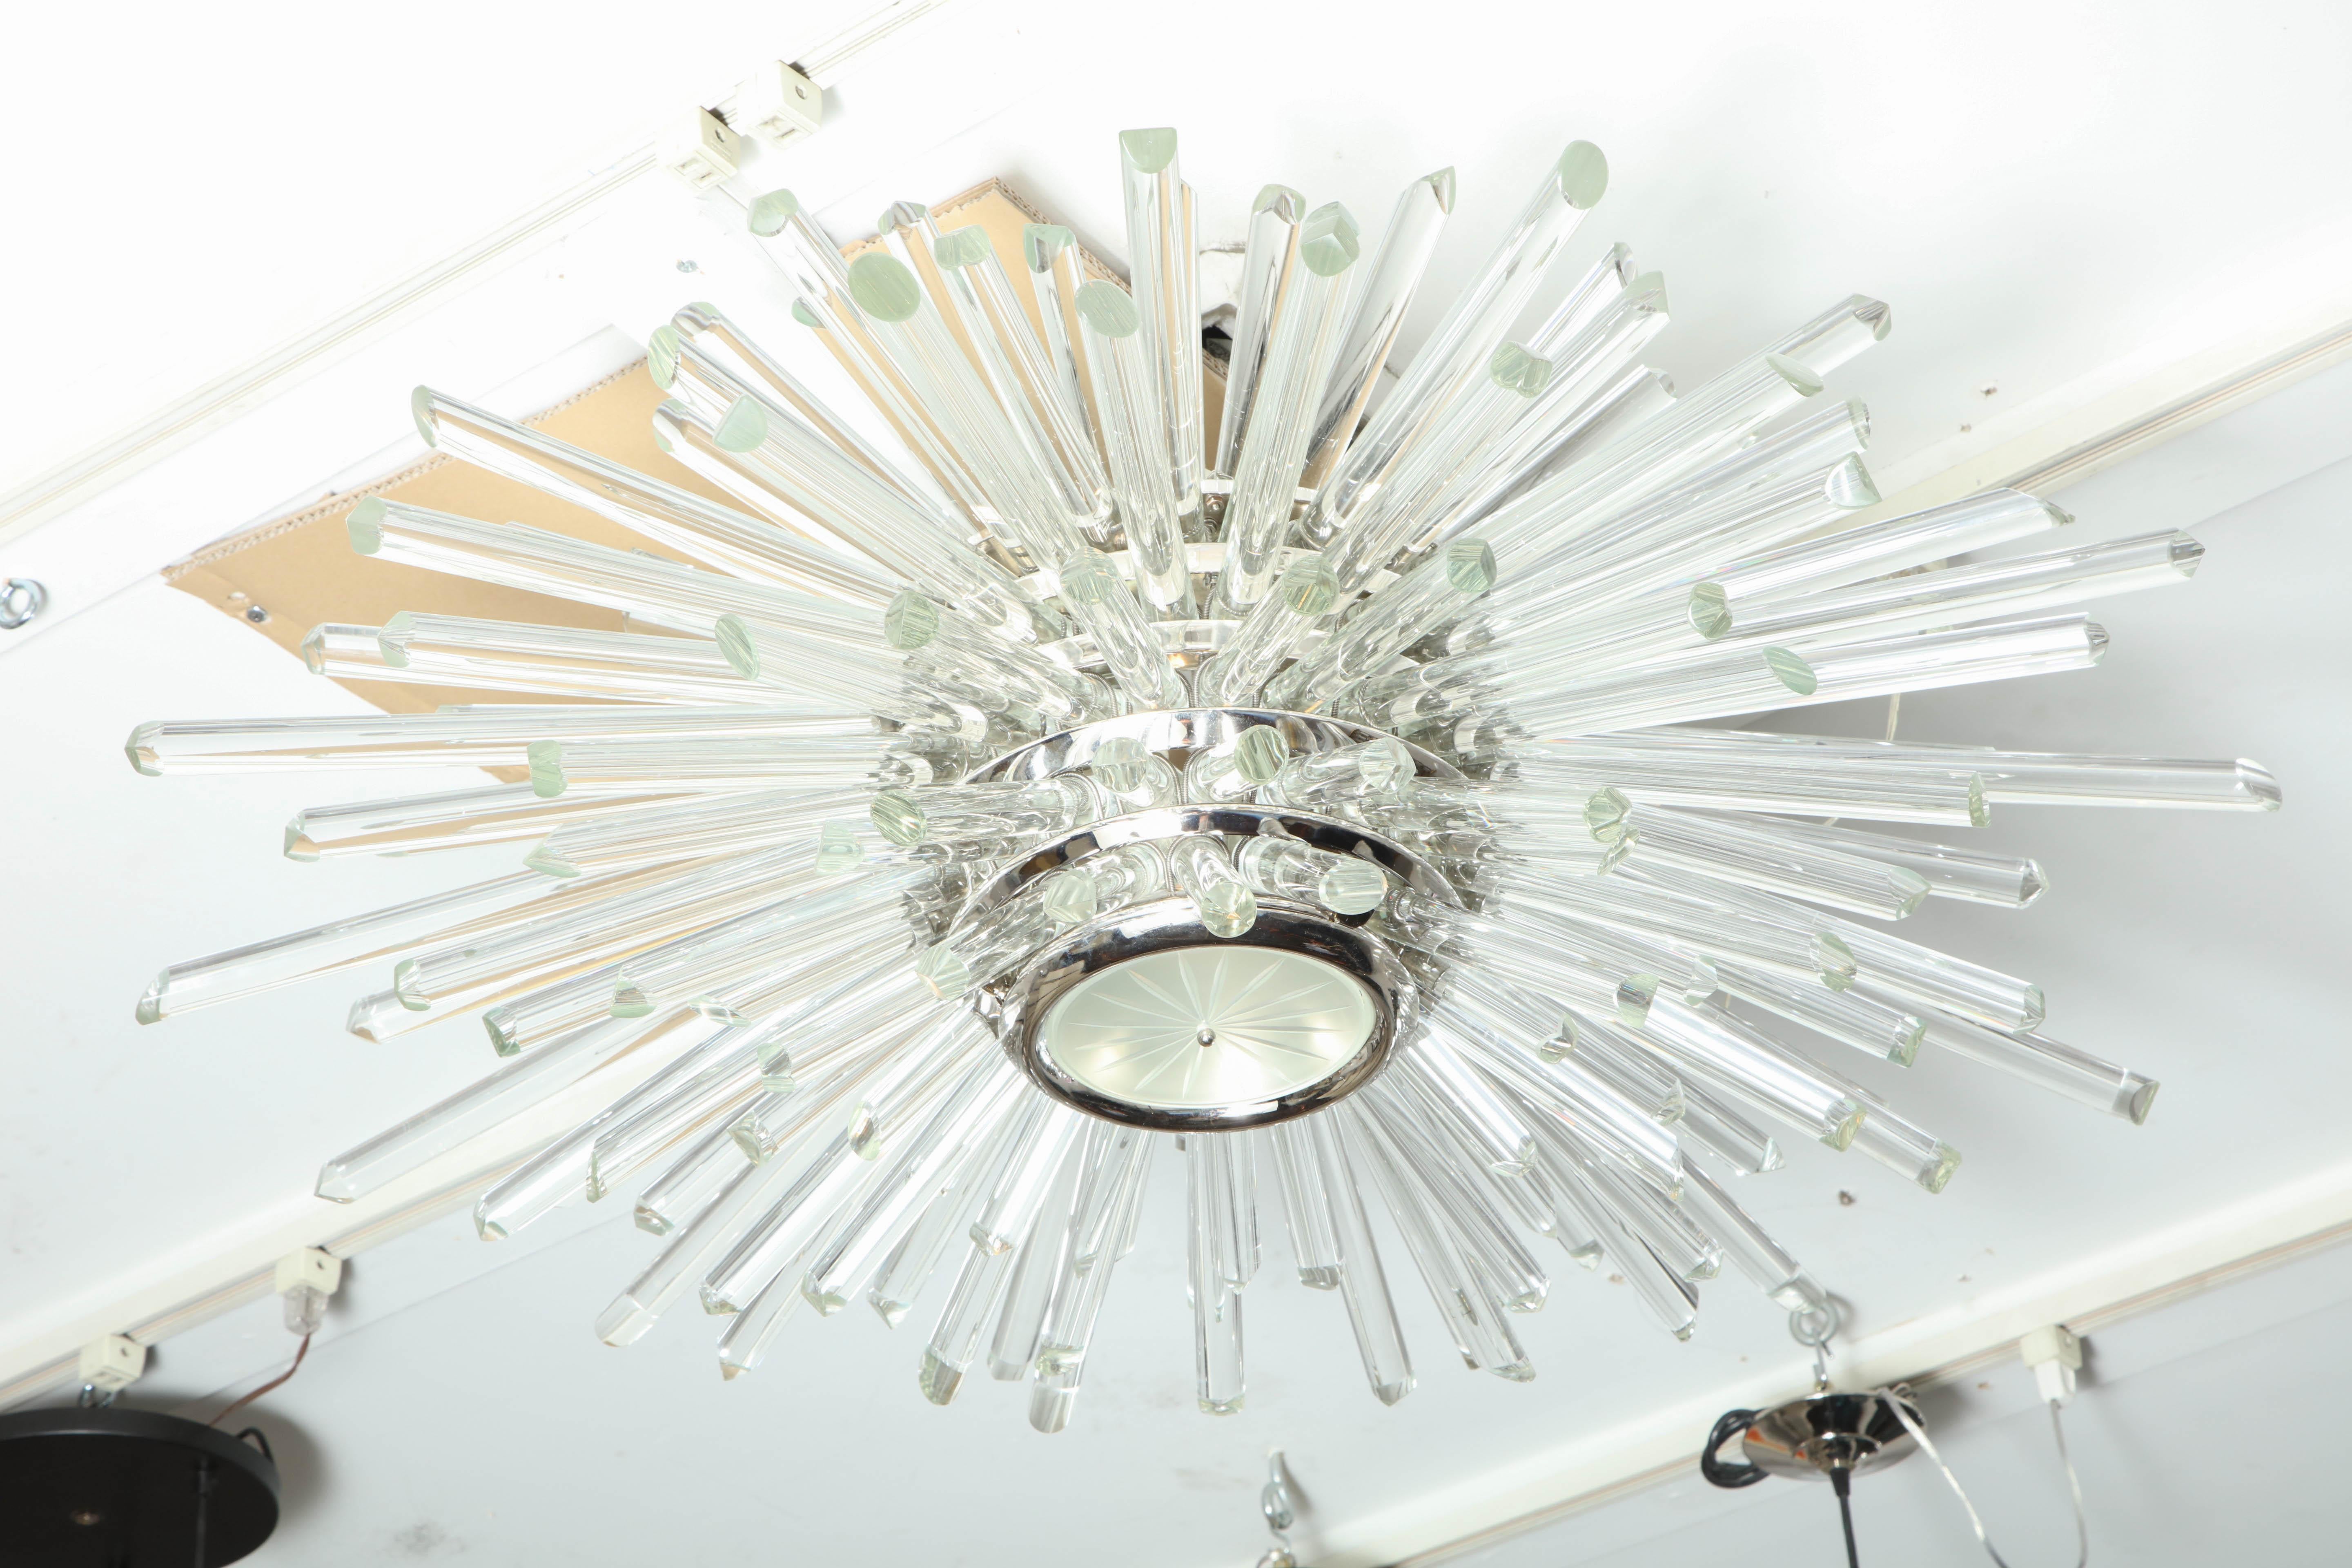 Custom illuminating glass rod Sputnik flush mount fixture in polished nickel finish. Custom orders are available for different sizes and finishes.